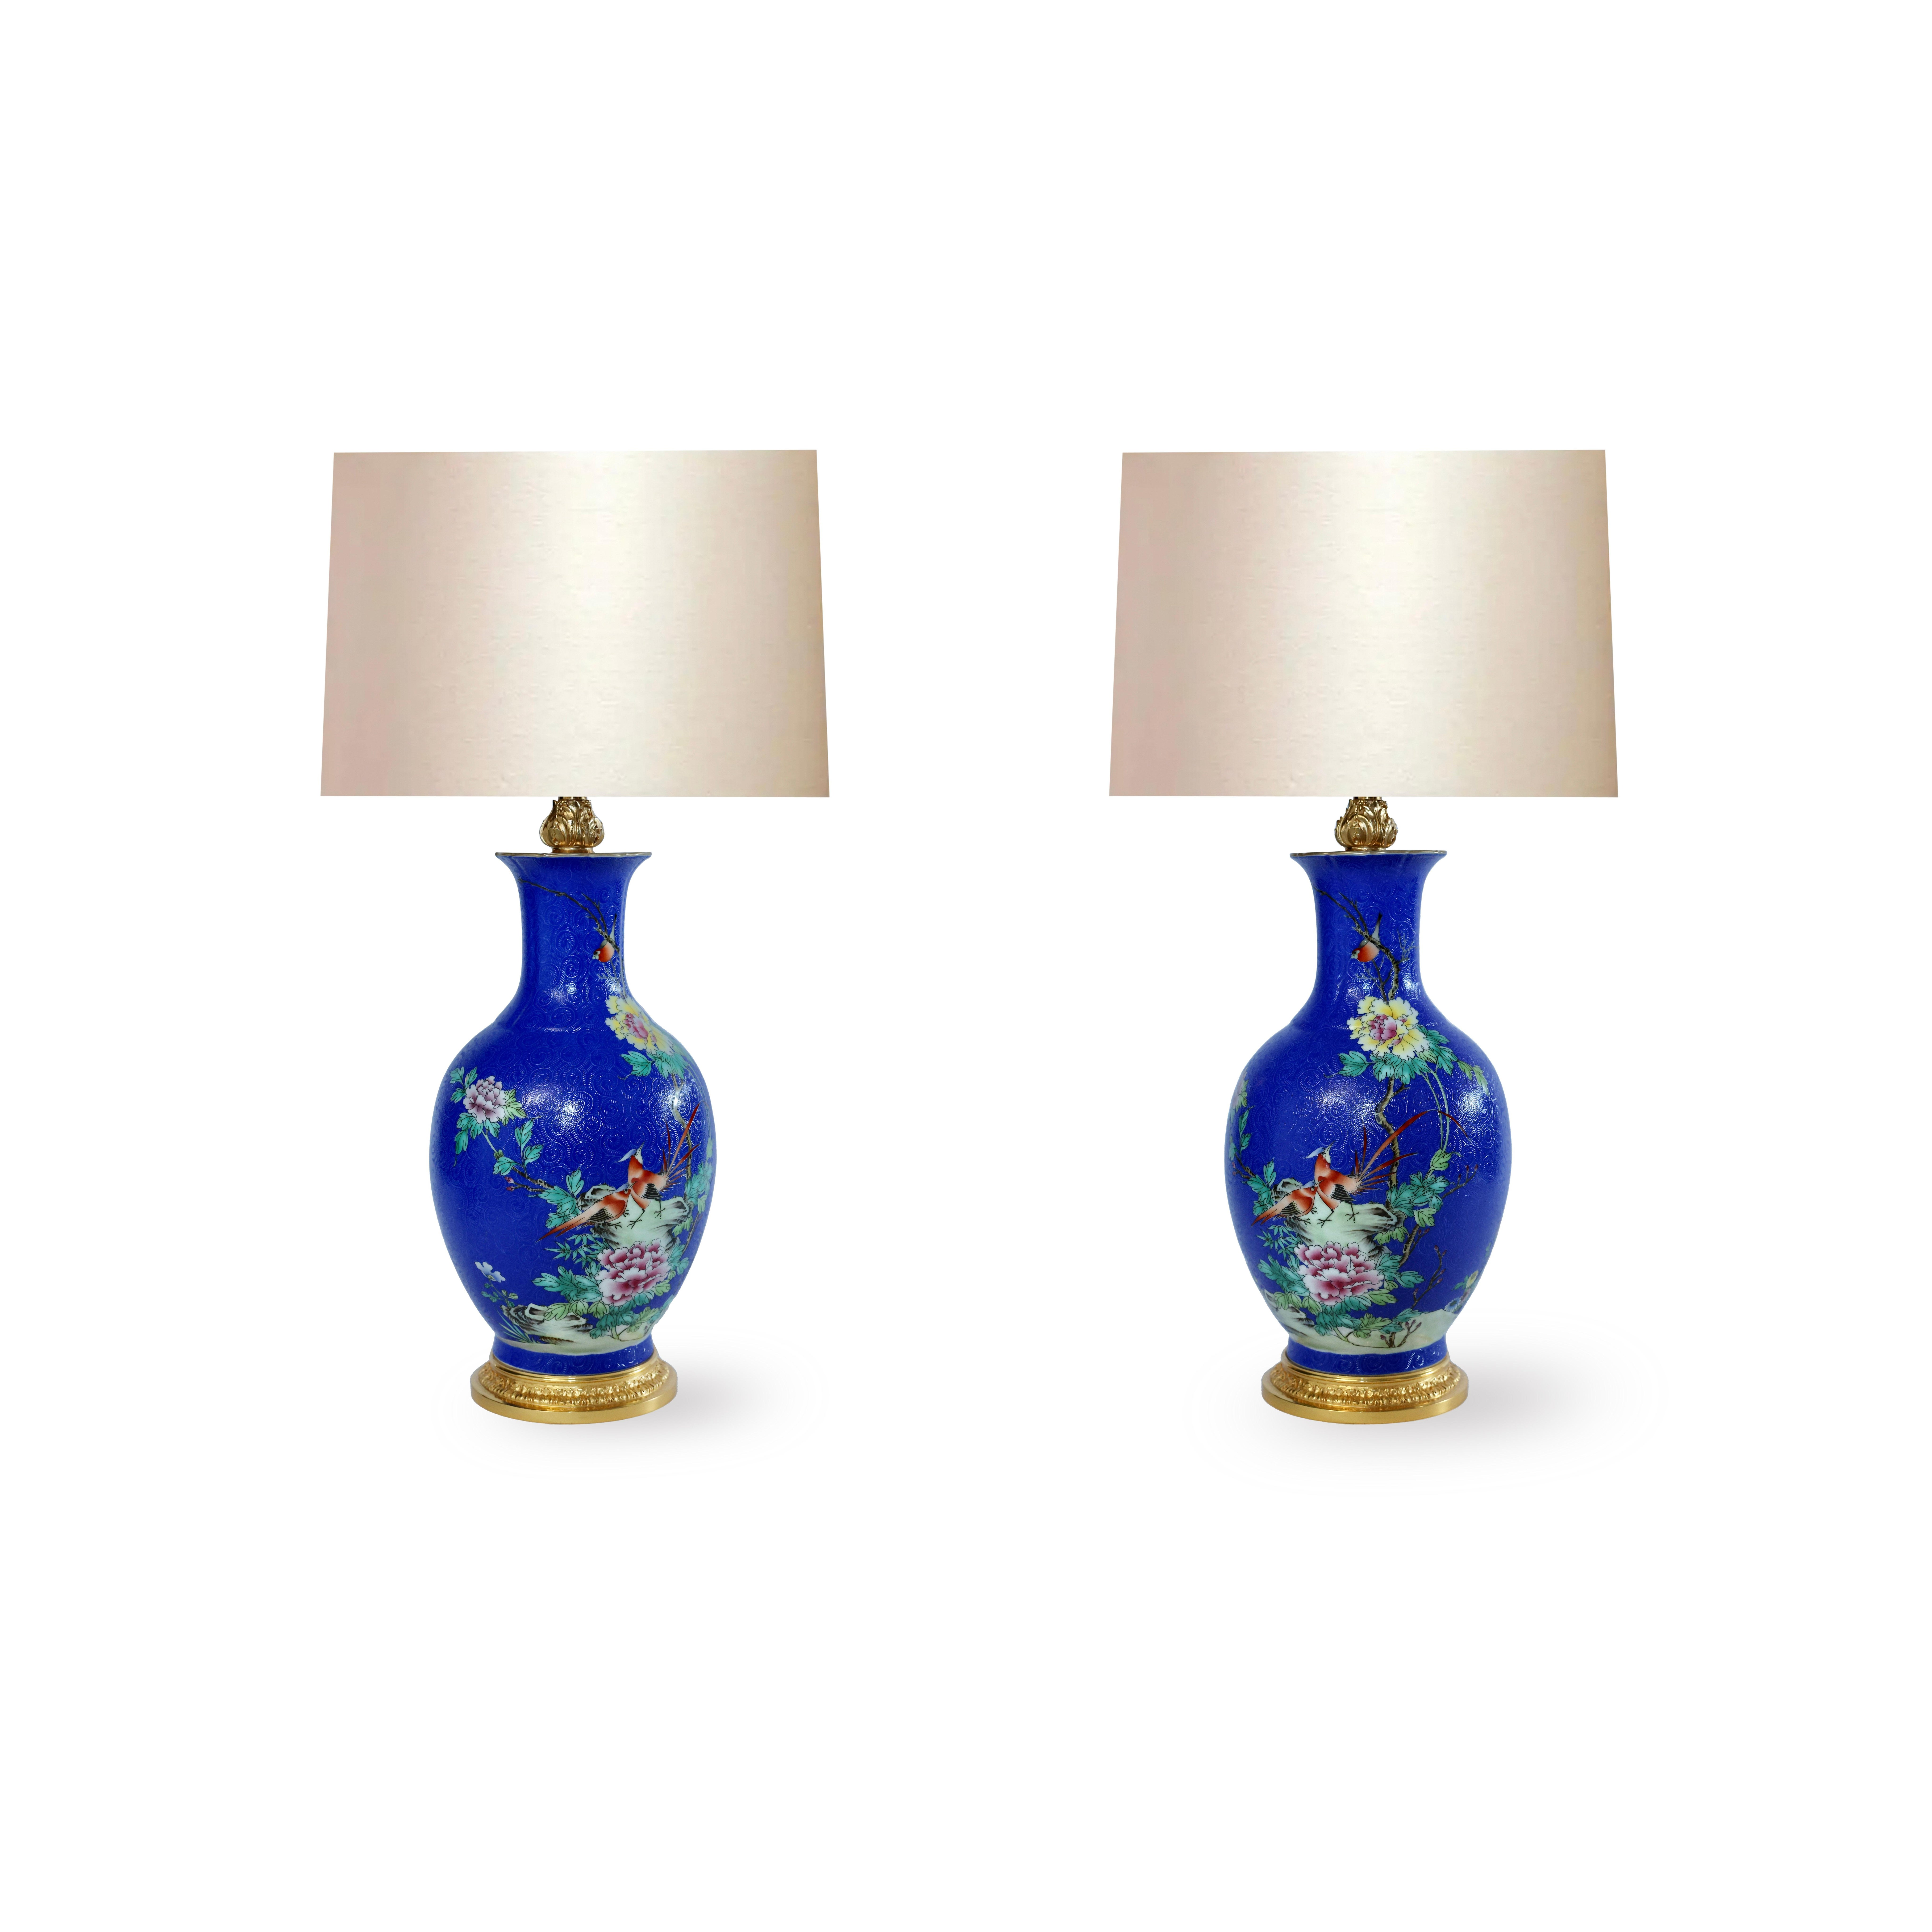 Pair of famille verte porcelain lamps with Finley cast gilt bases.
lampshades are not included.
to the top of the vase 13.5 inch